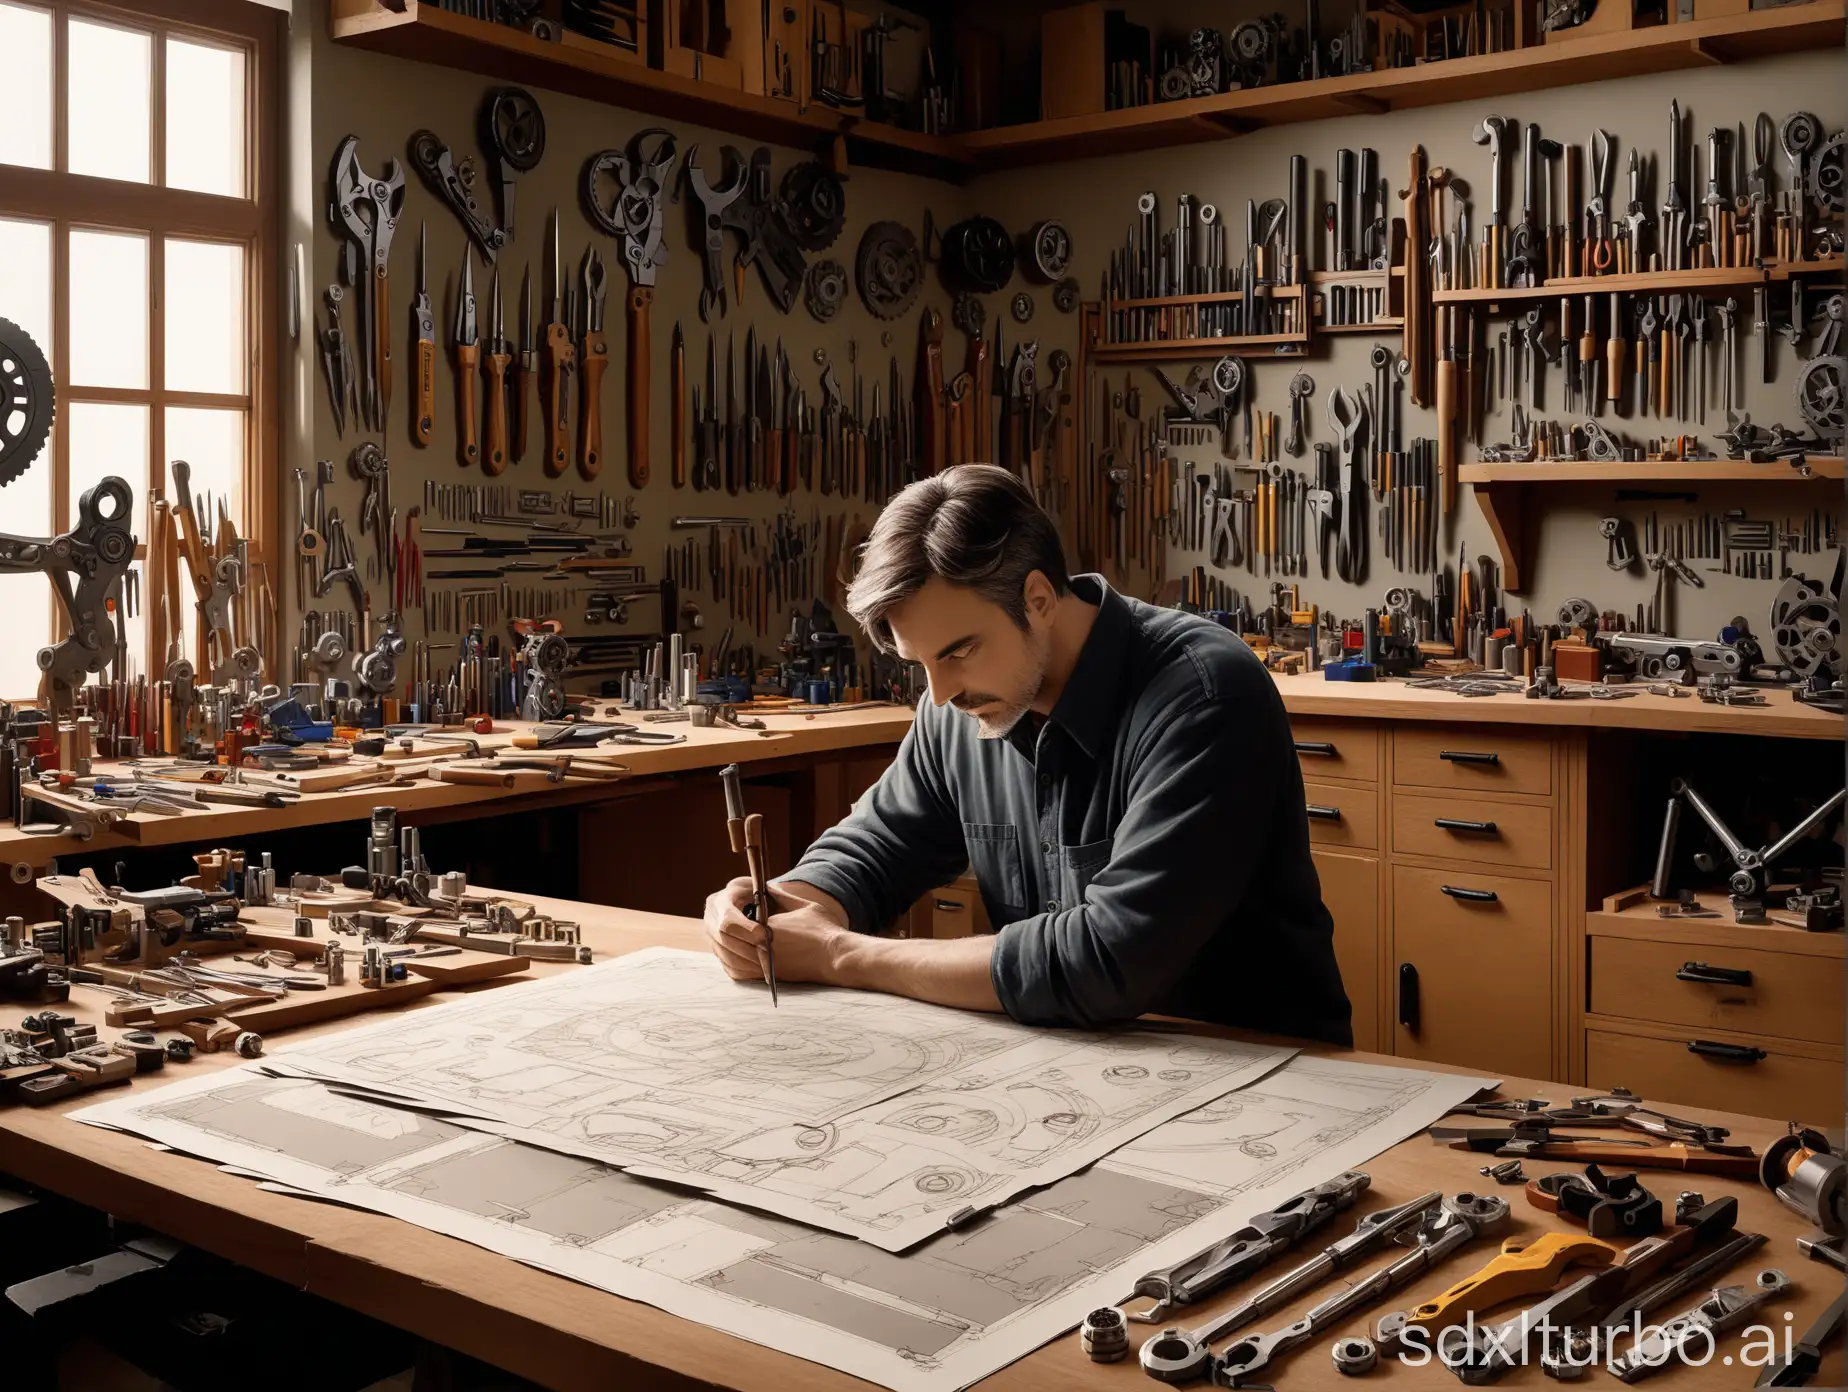 A craftsman with an ISTP personality is sitting in front of a workbench full of various tools and materials, skillfully operating complex mechanical parts. His gaze is calm and profound, his brows furrowed as if he is carrying out some complex logical analysis. His workbench is laid out with exquisite parts and blueprints, showing off his mastery of craftsmanship and pursuit of perfection. On the wall behind him are hung some of his completed works, which not only showcase his skill but also reflect his calm analysis and problem-solving abilities. The whole scene is filled with a professional, precise and calm atmosphere, while also revealing a hint of love and pride for craftsmanship.